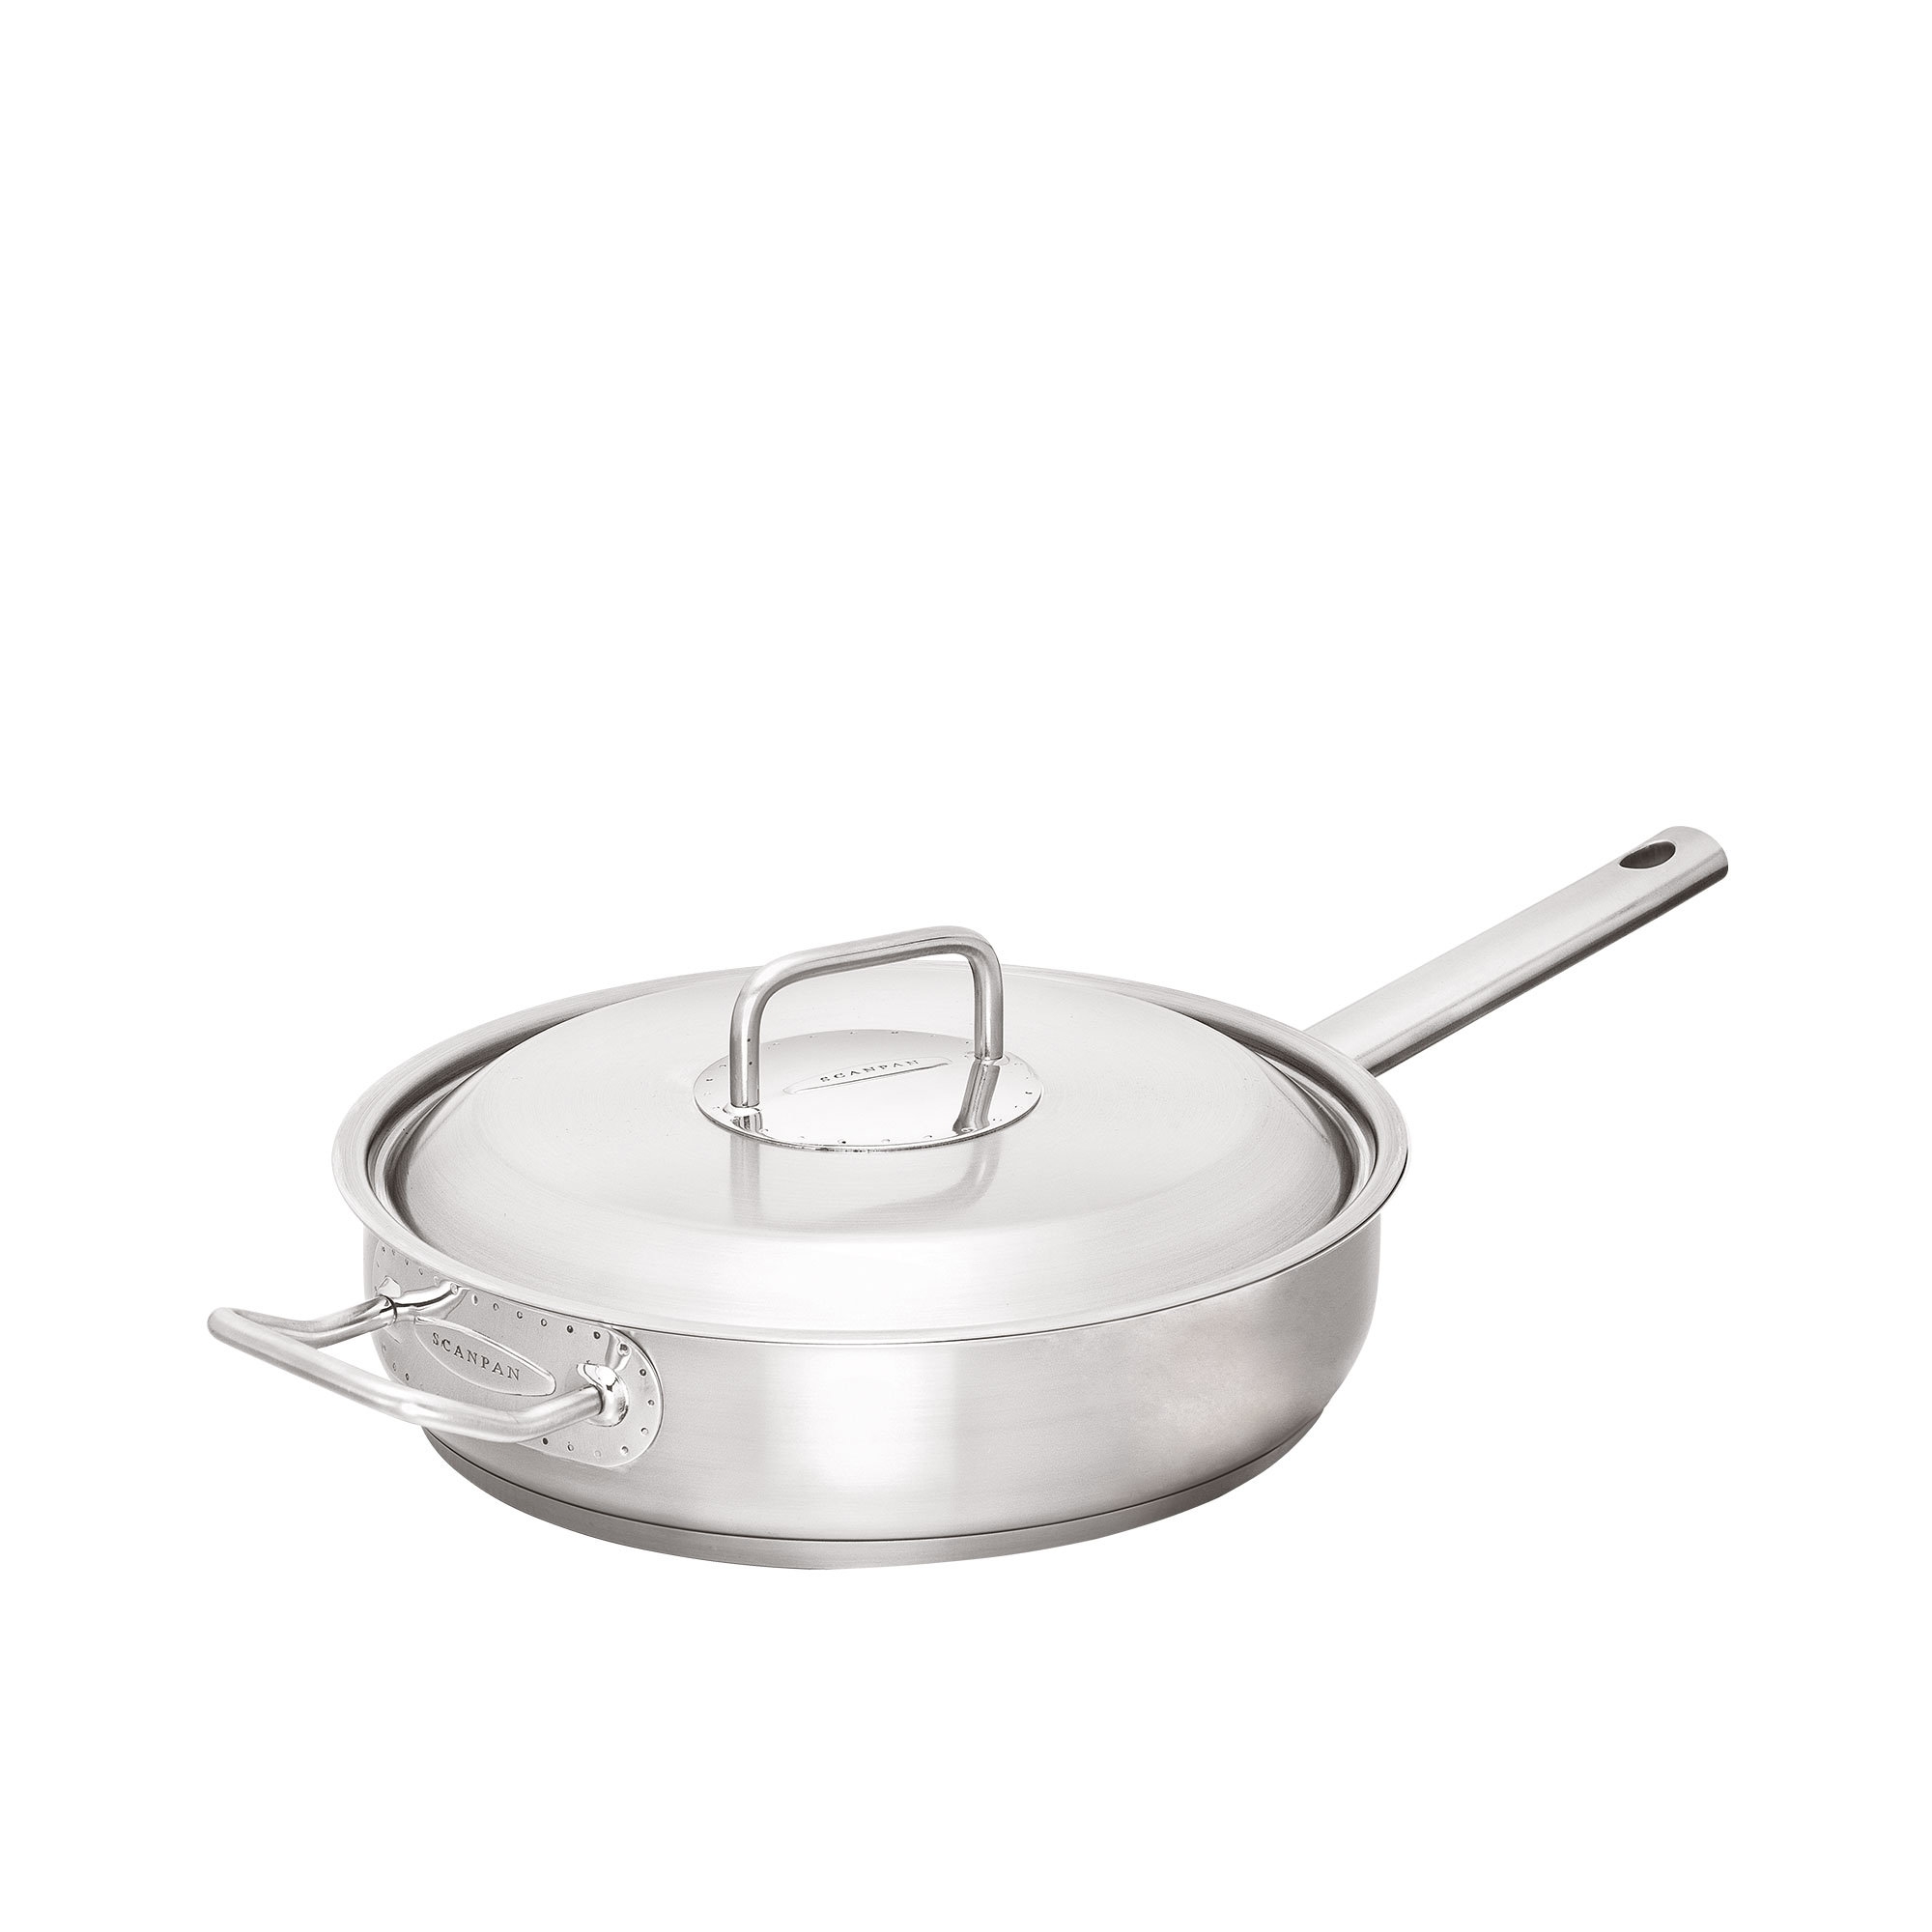 Scanpan Commercial Covered Saute Pan 28cm Image 1